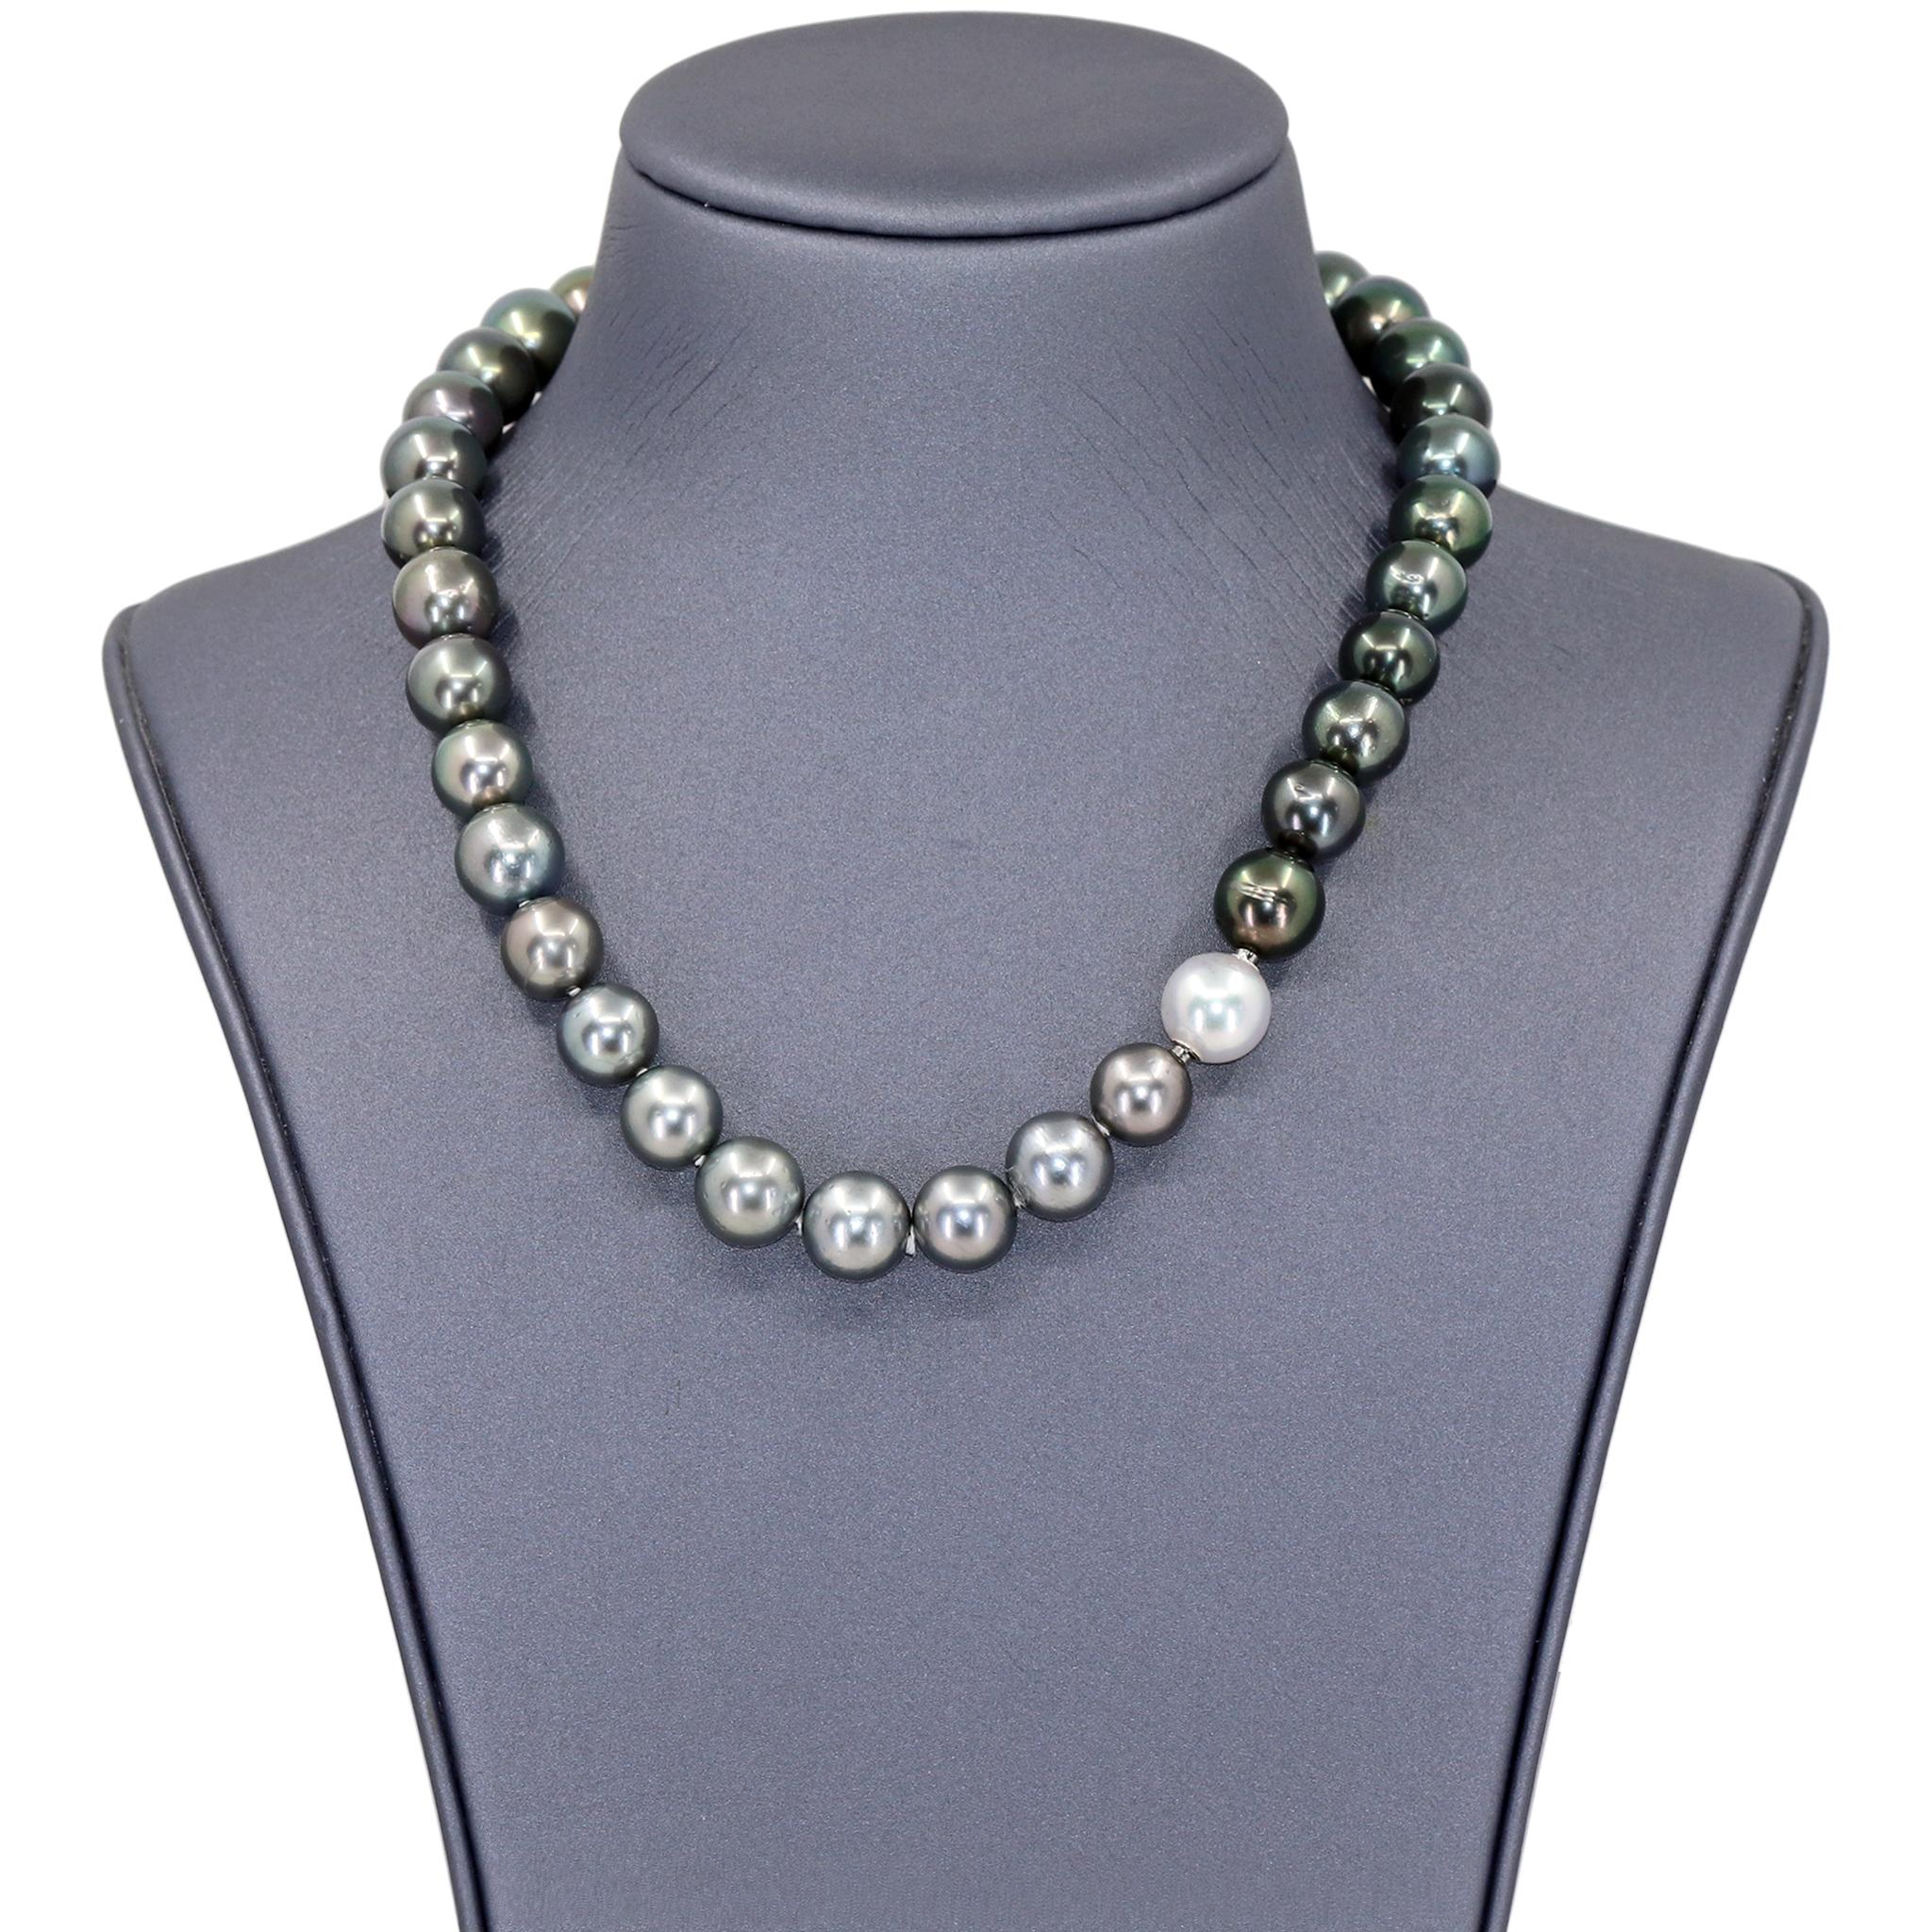 Atelier Zobel Ombré Tahitian and South Sea Pearl Multilength Necklaces 2